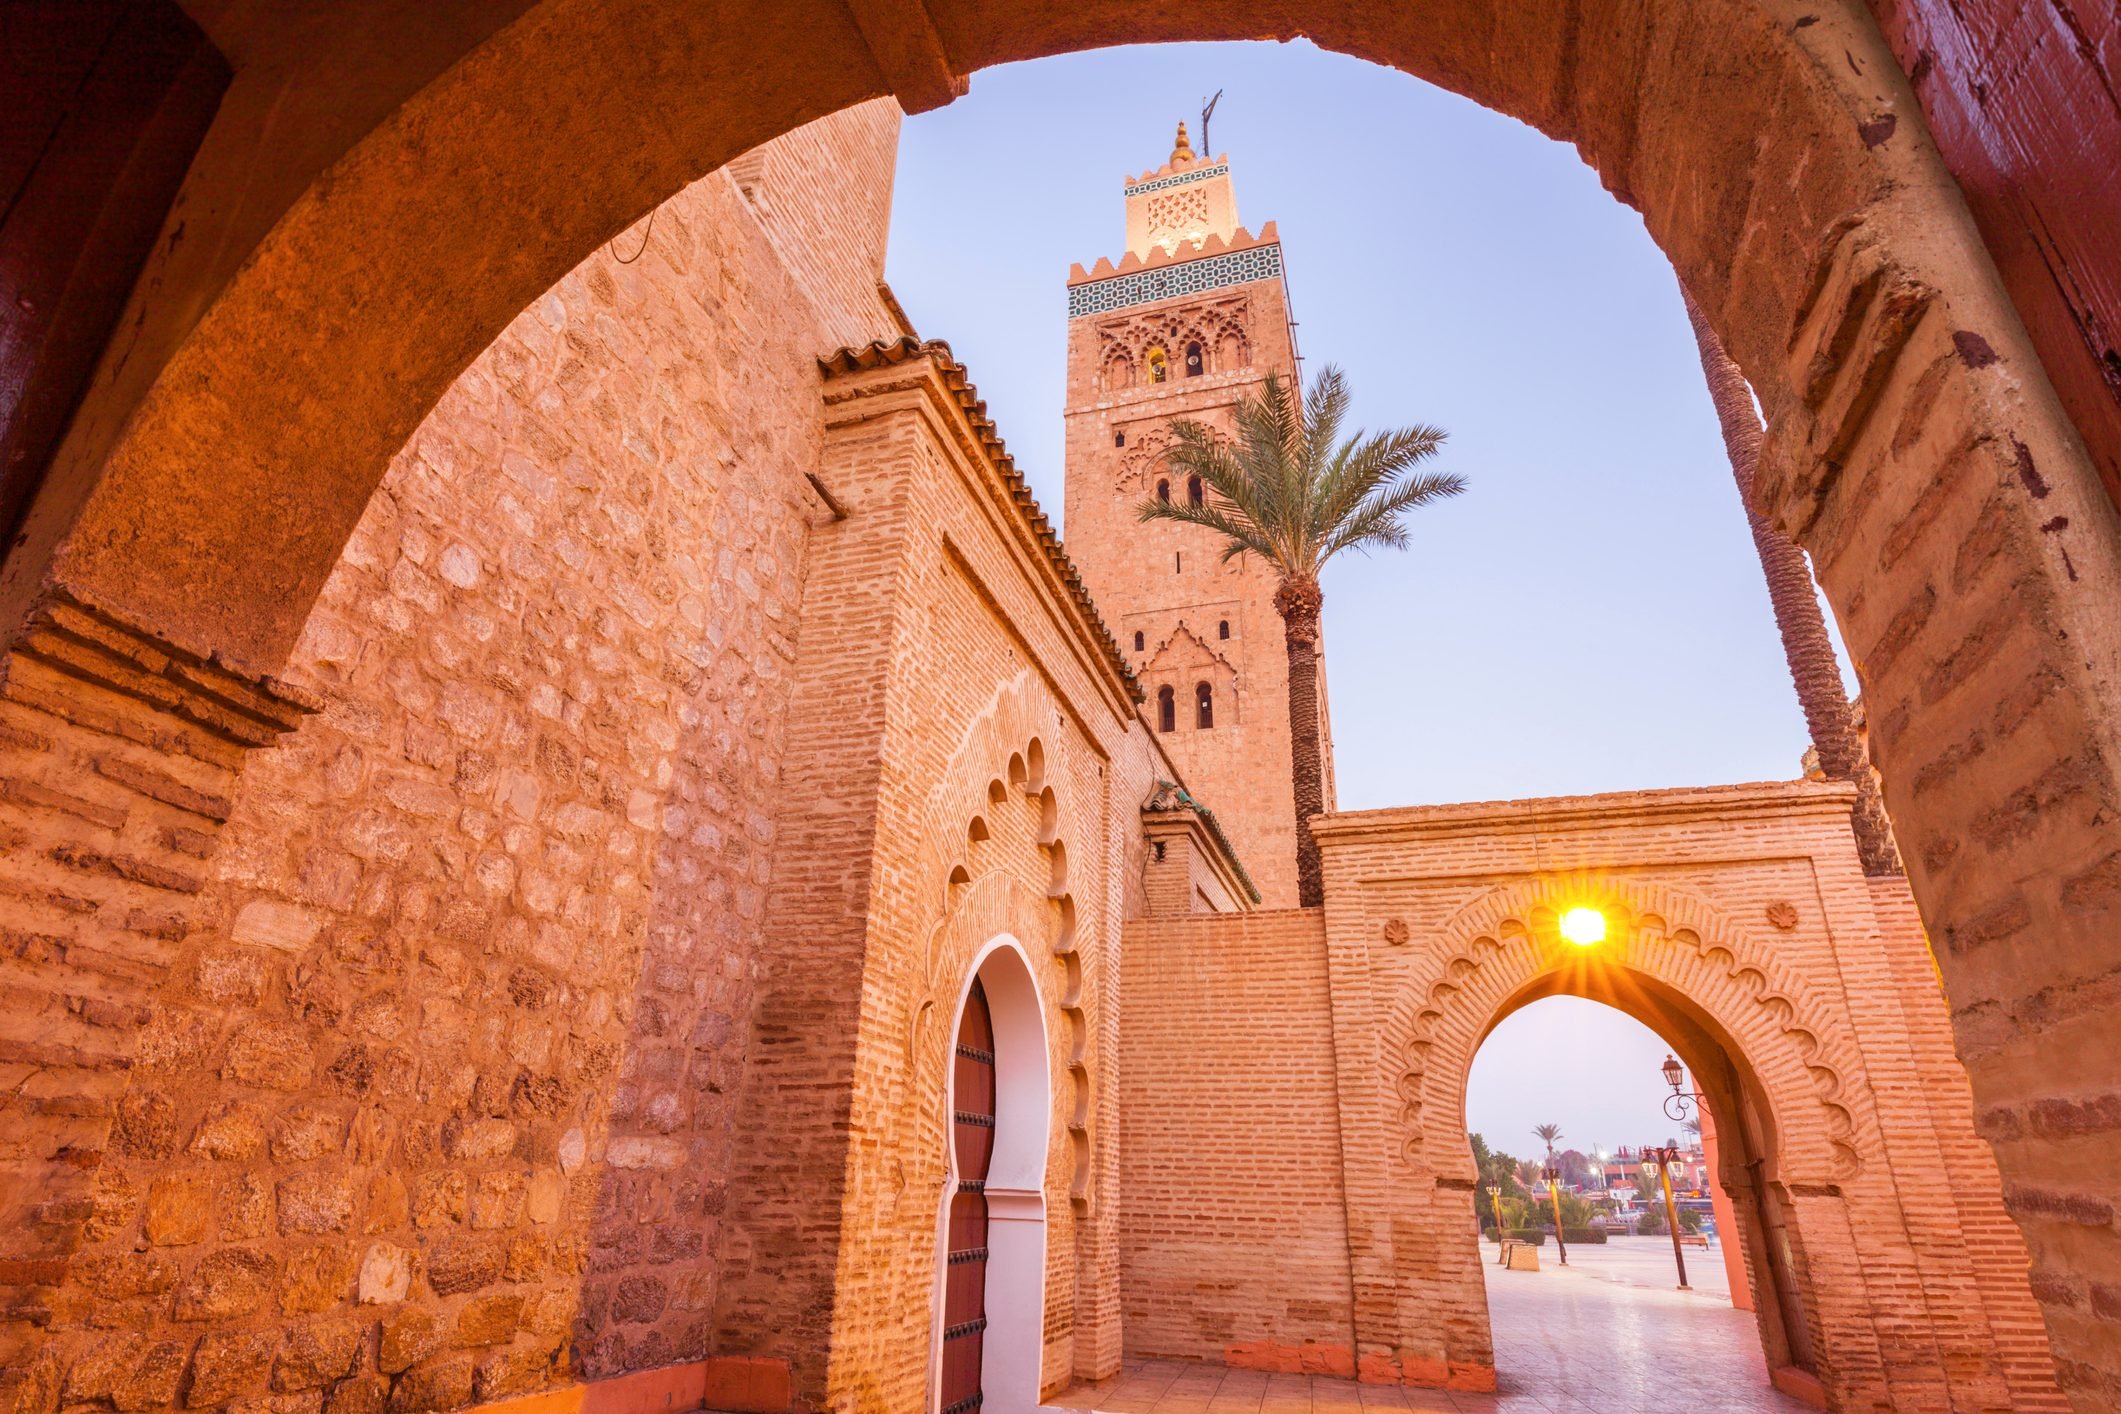 Low angle view of Koutoubia Mosque in Marrakesh, Morocco